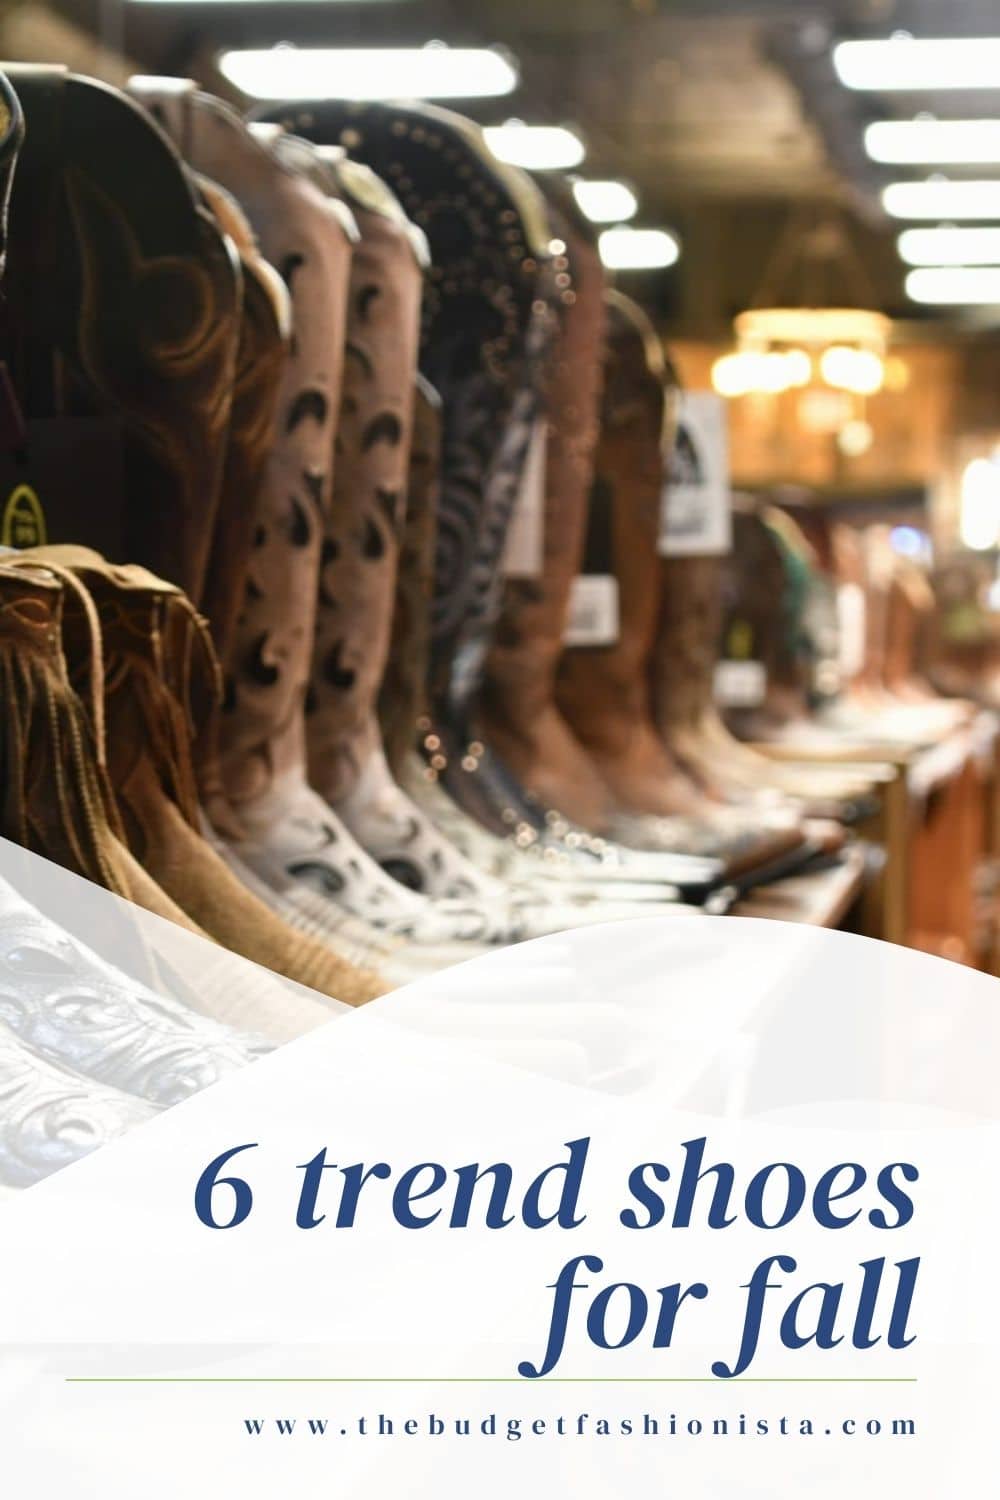 6 trend shoes for fall by Budget Fashionista.